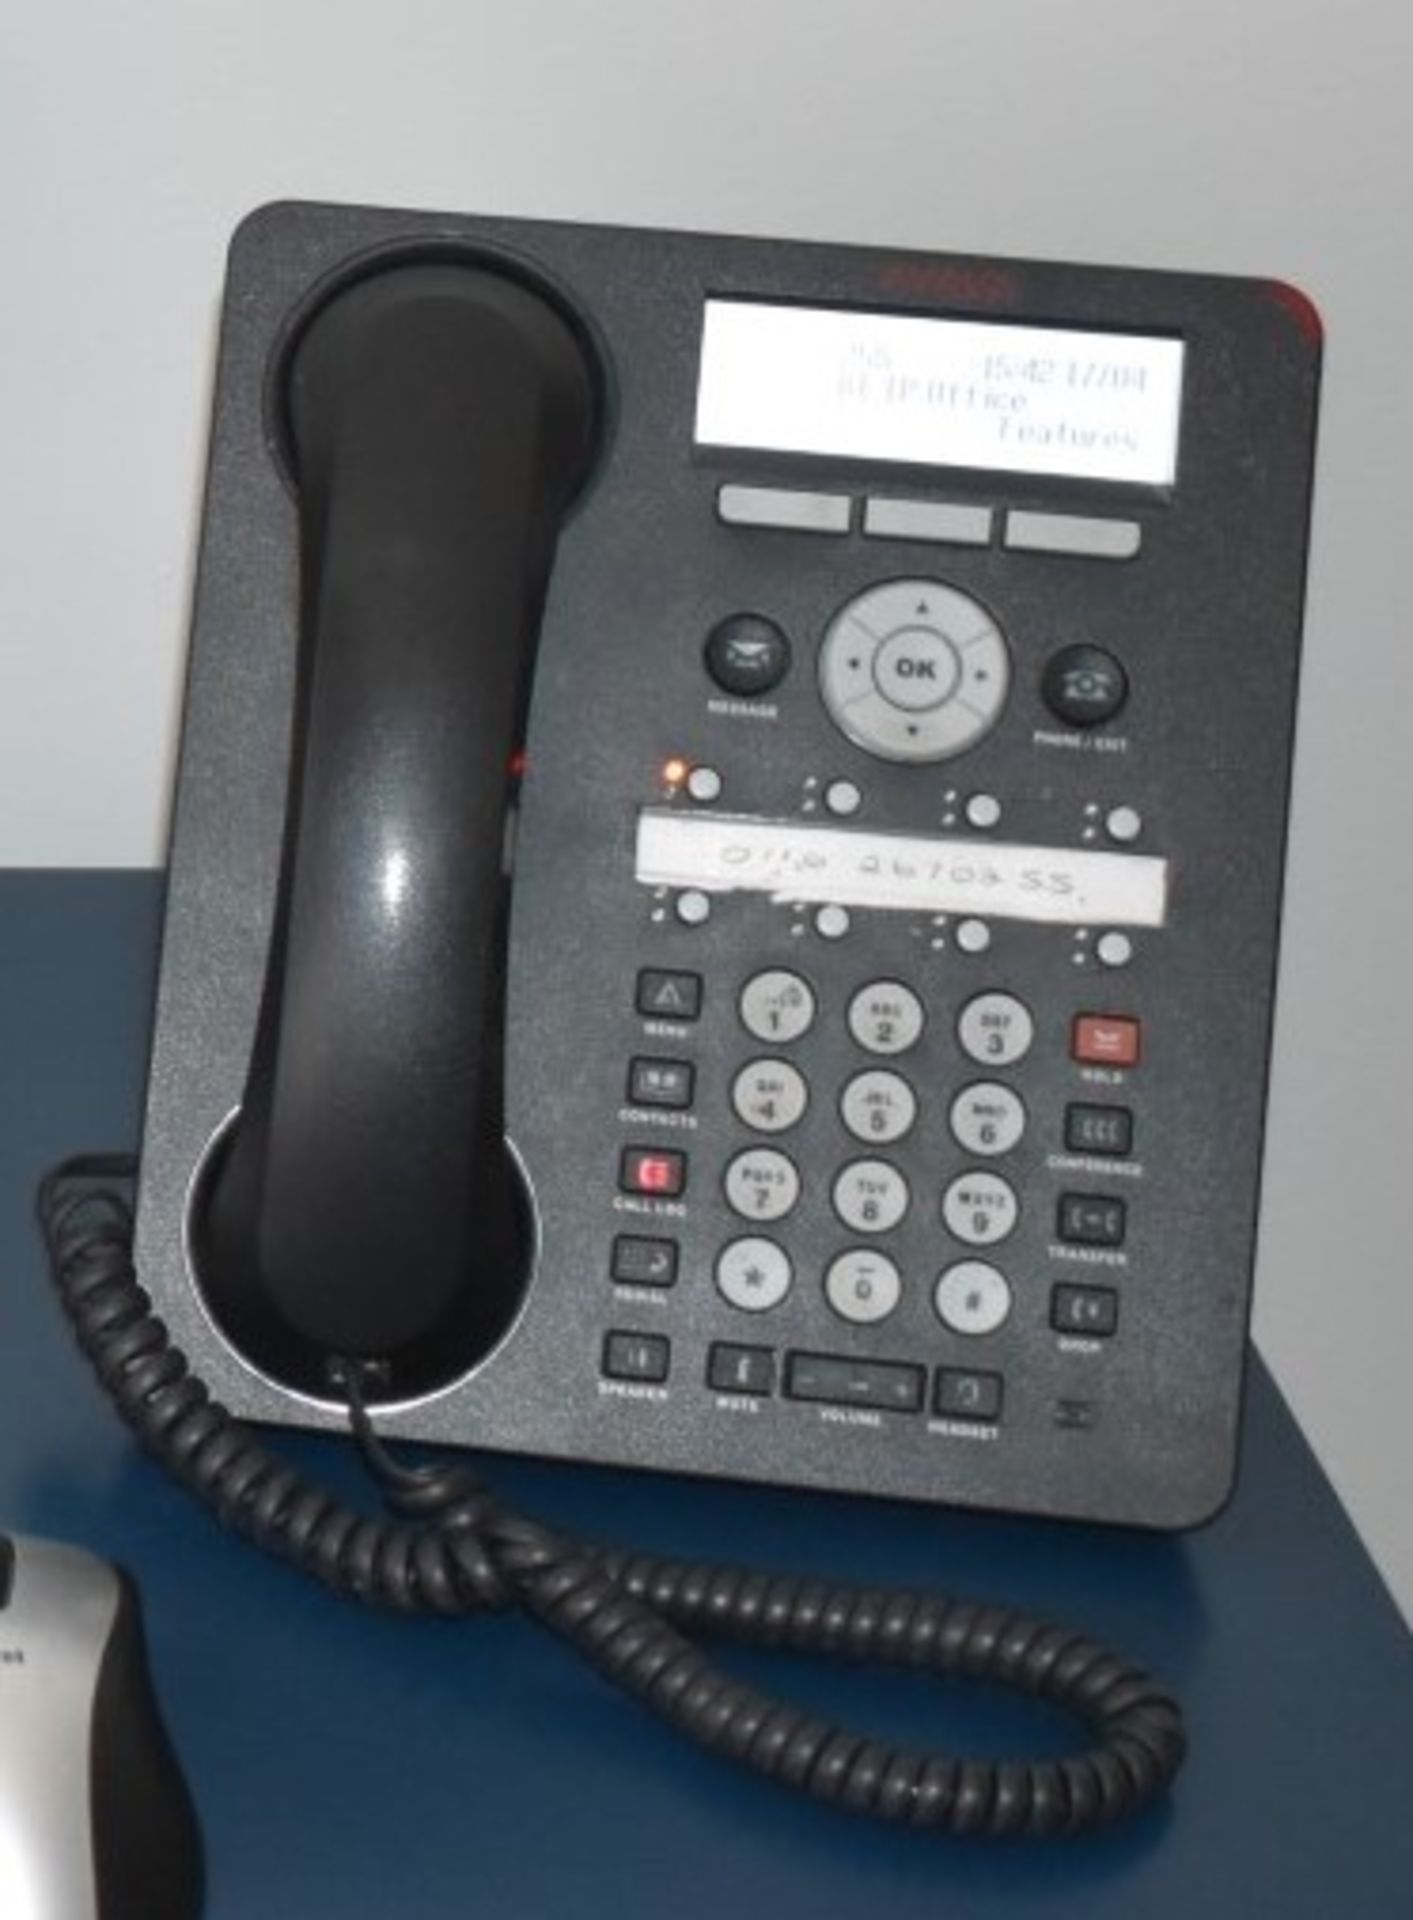 1 x Avaya IP500 V2 IP IP VOID Business Telephone System With 4 x Combi Cards and 9 x Phone Handsets - Image 14 of 15